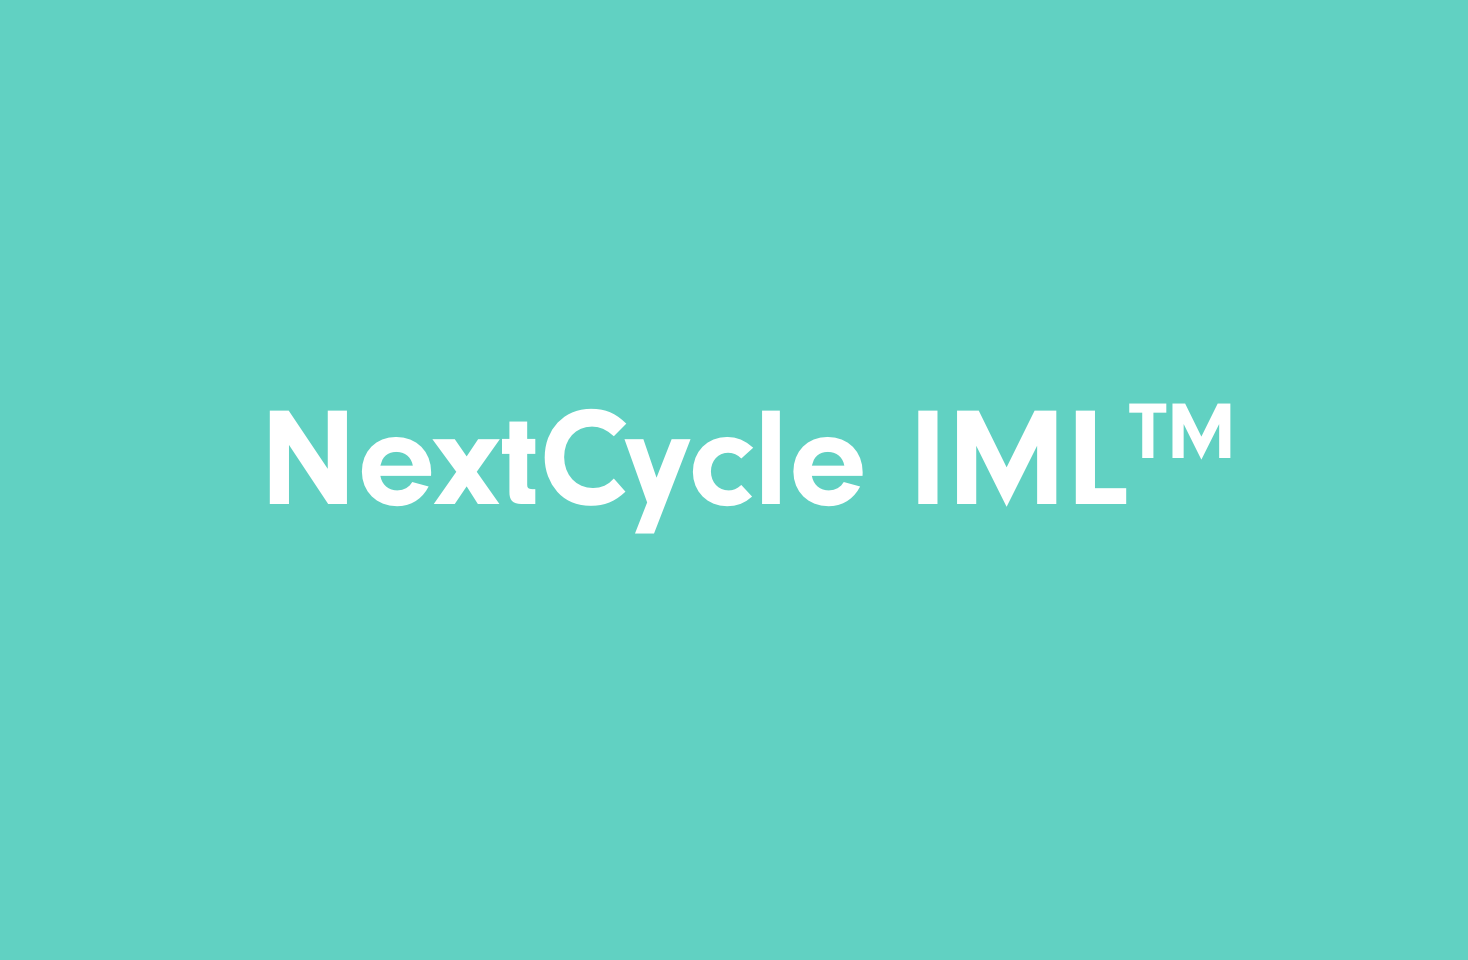 Image of MCC Verstraete sets a new standard for future sustainable IML packaging with NextCycle IML™